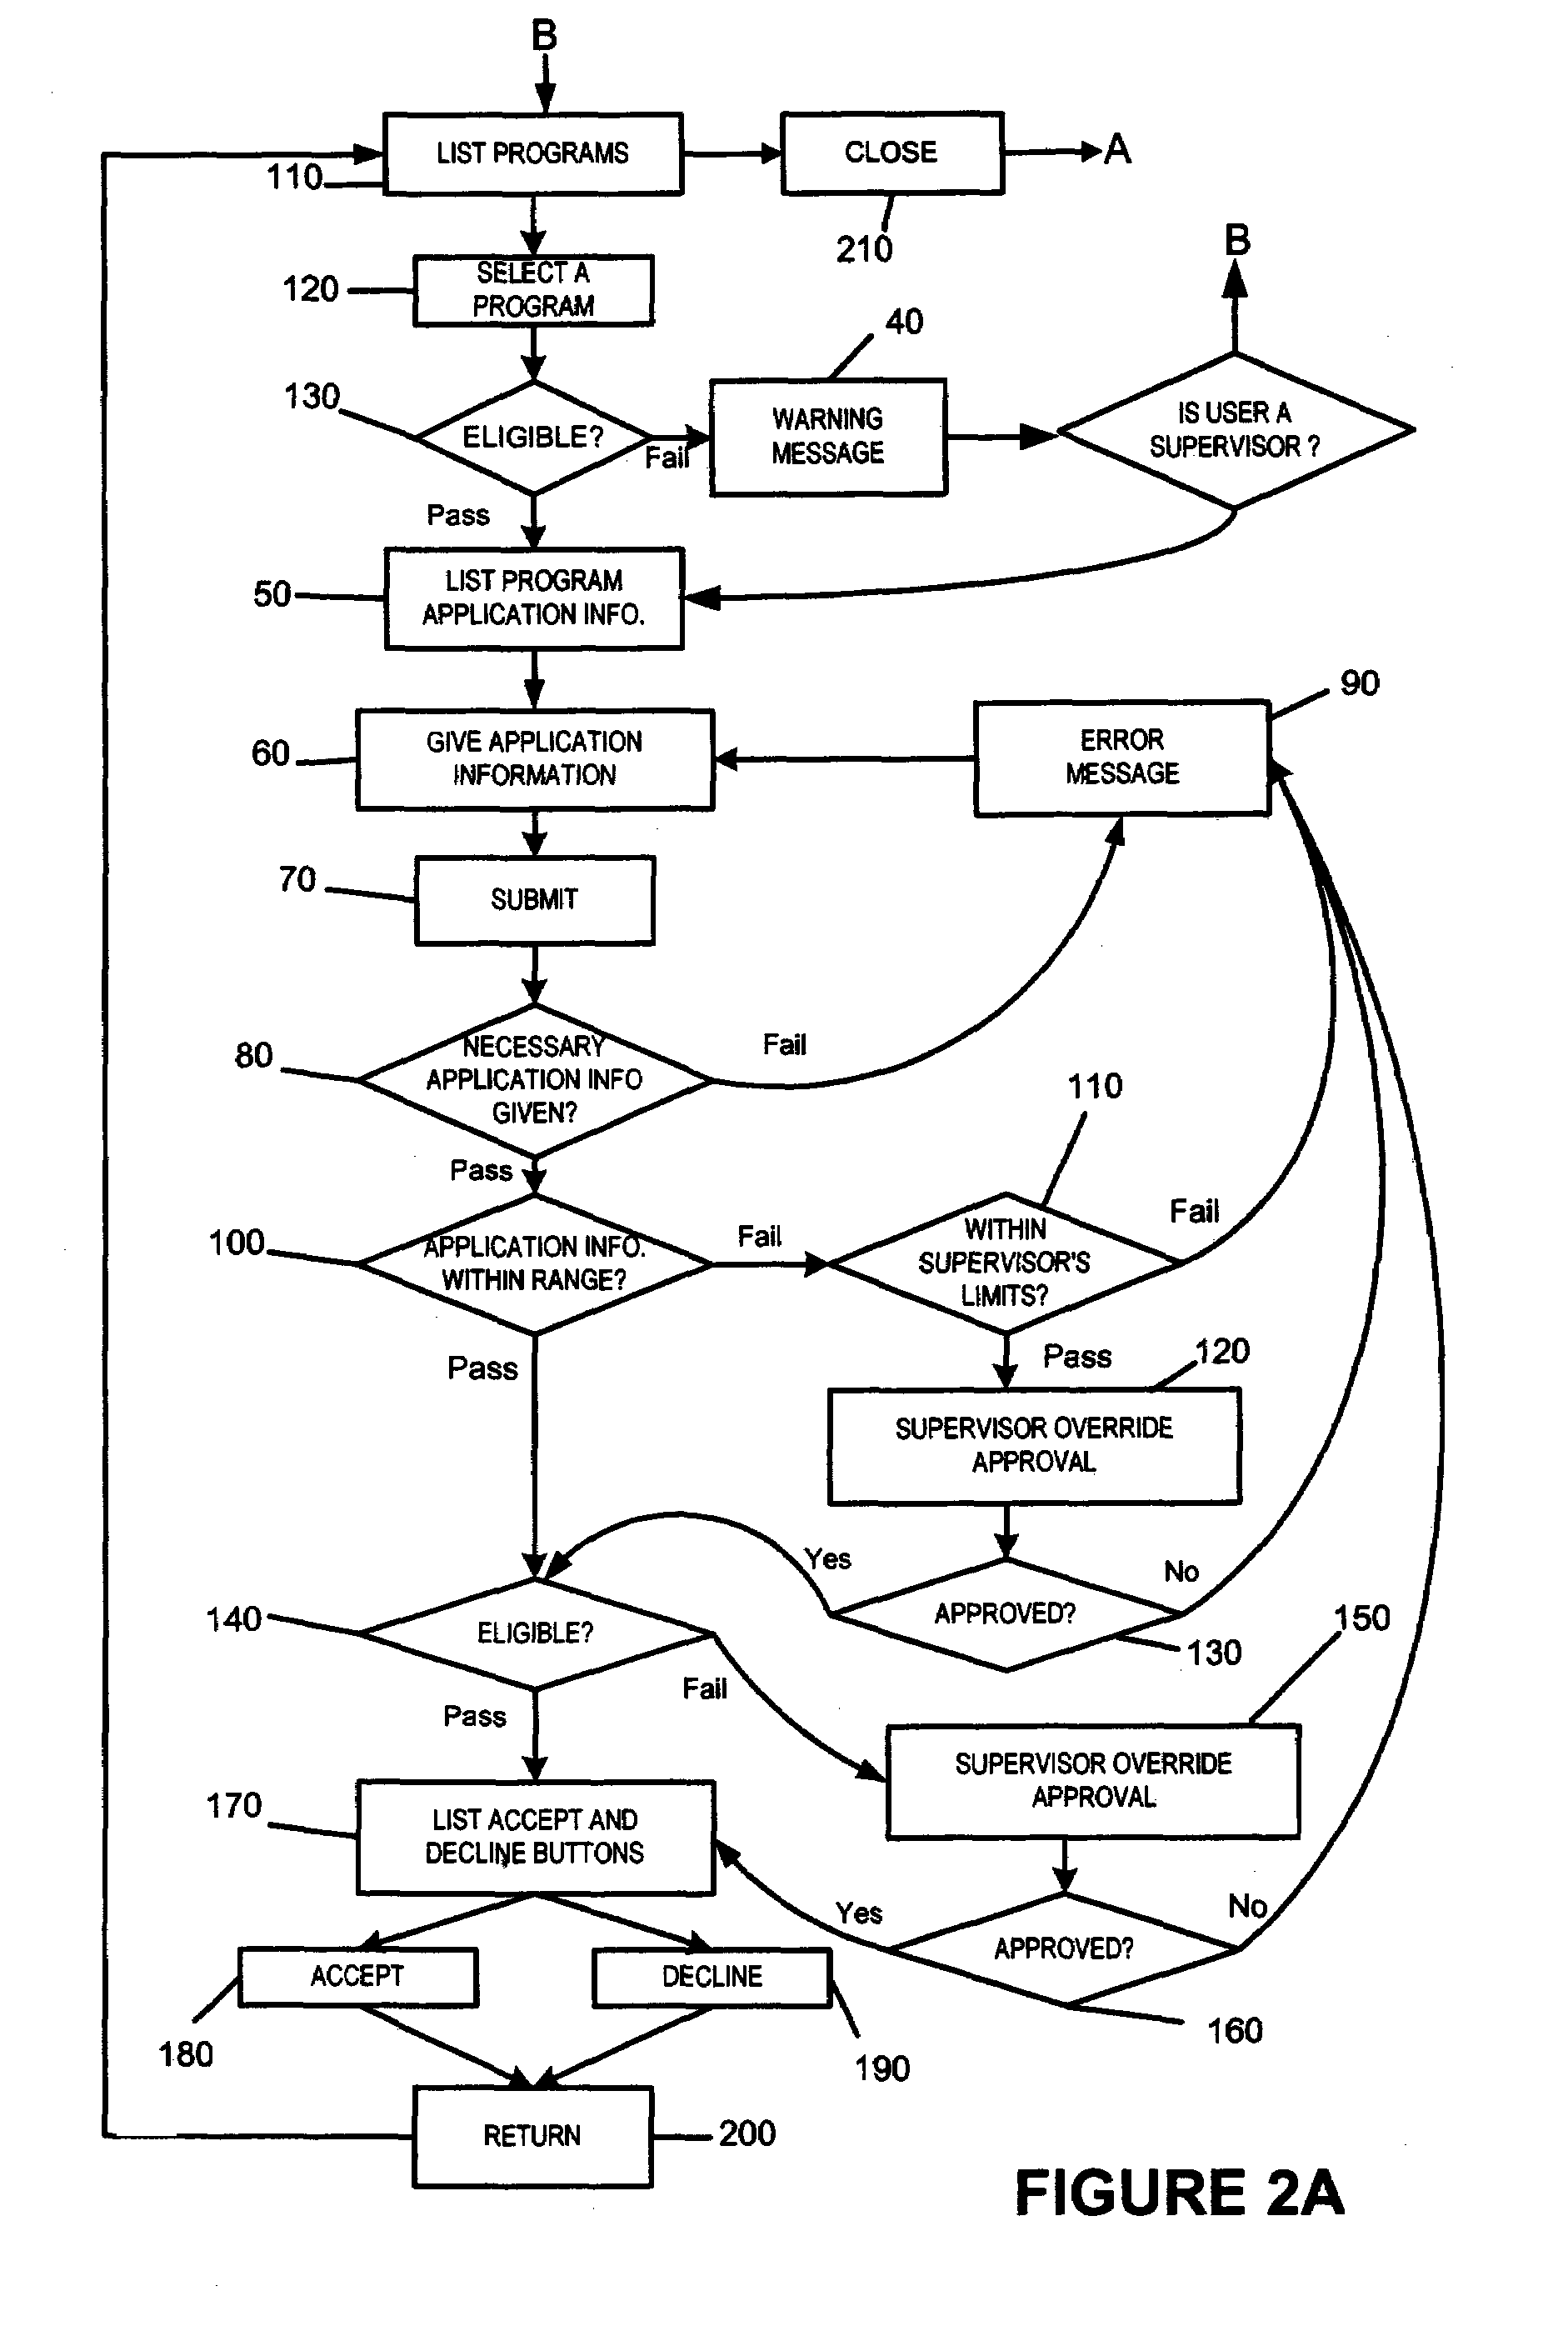 System and method for determining eligibility and enrolling members in various programs